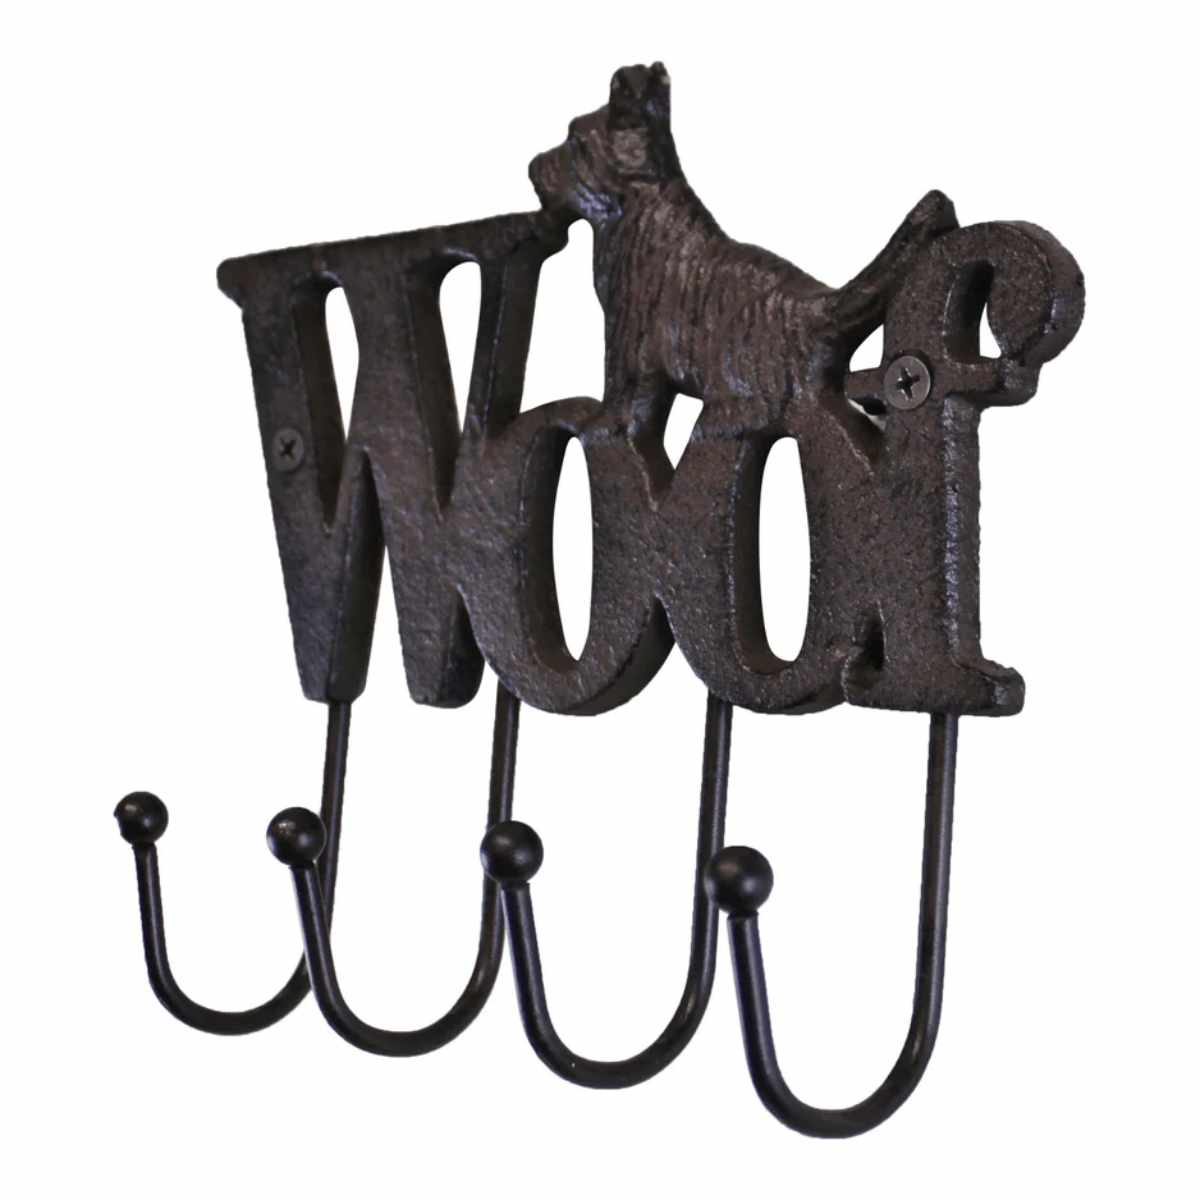 Rustic Cast Iron Wall Hooks, Dog Design With 4 Hooks 3